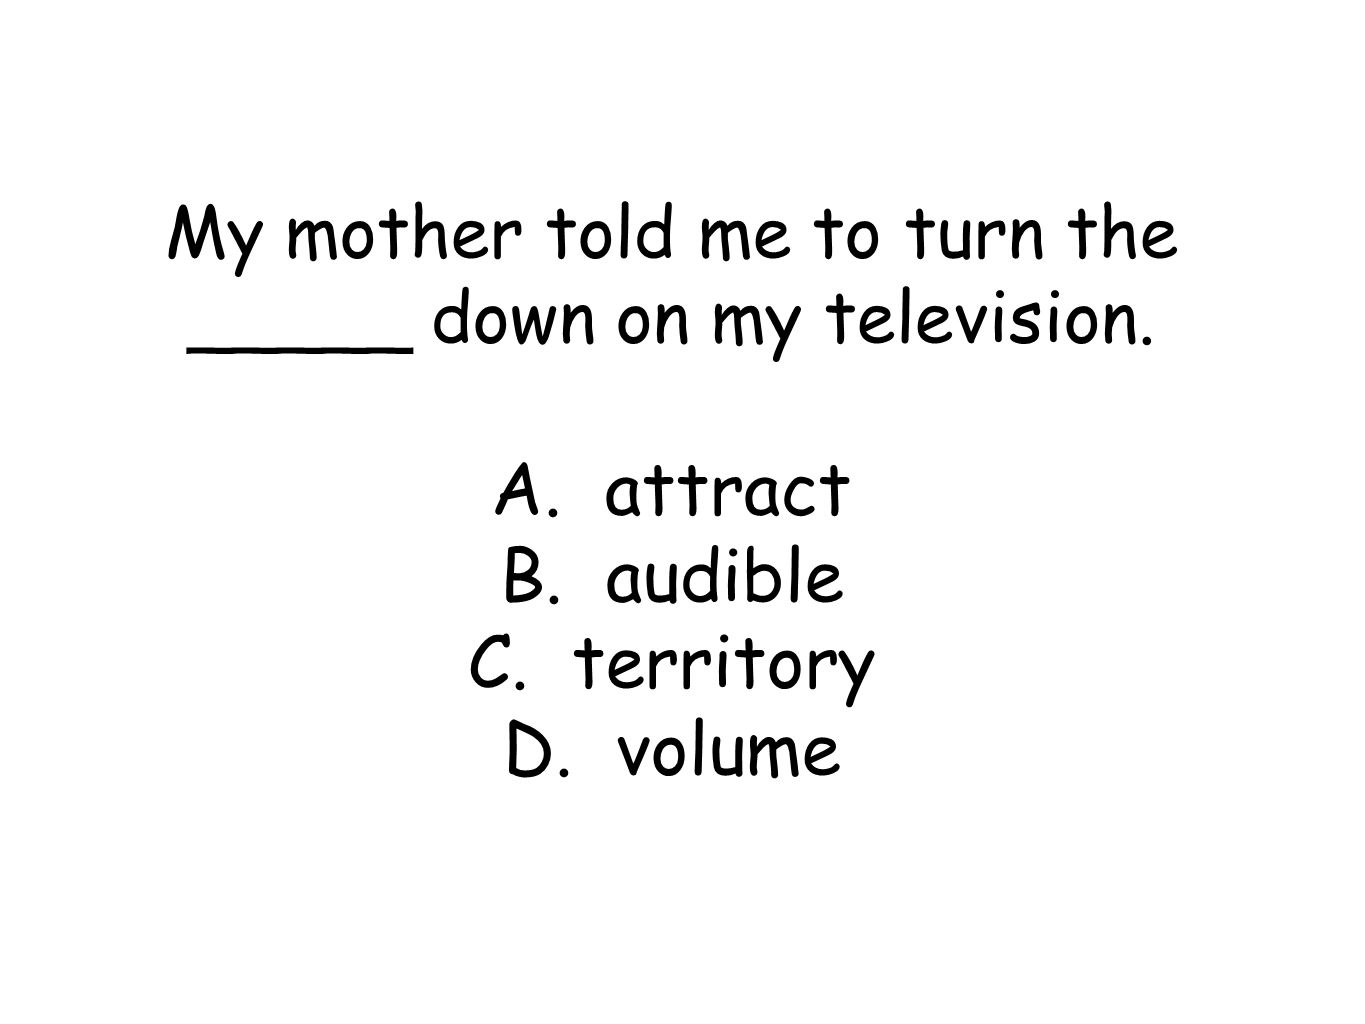 My mother told me to turn the _____ down on my television.